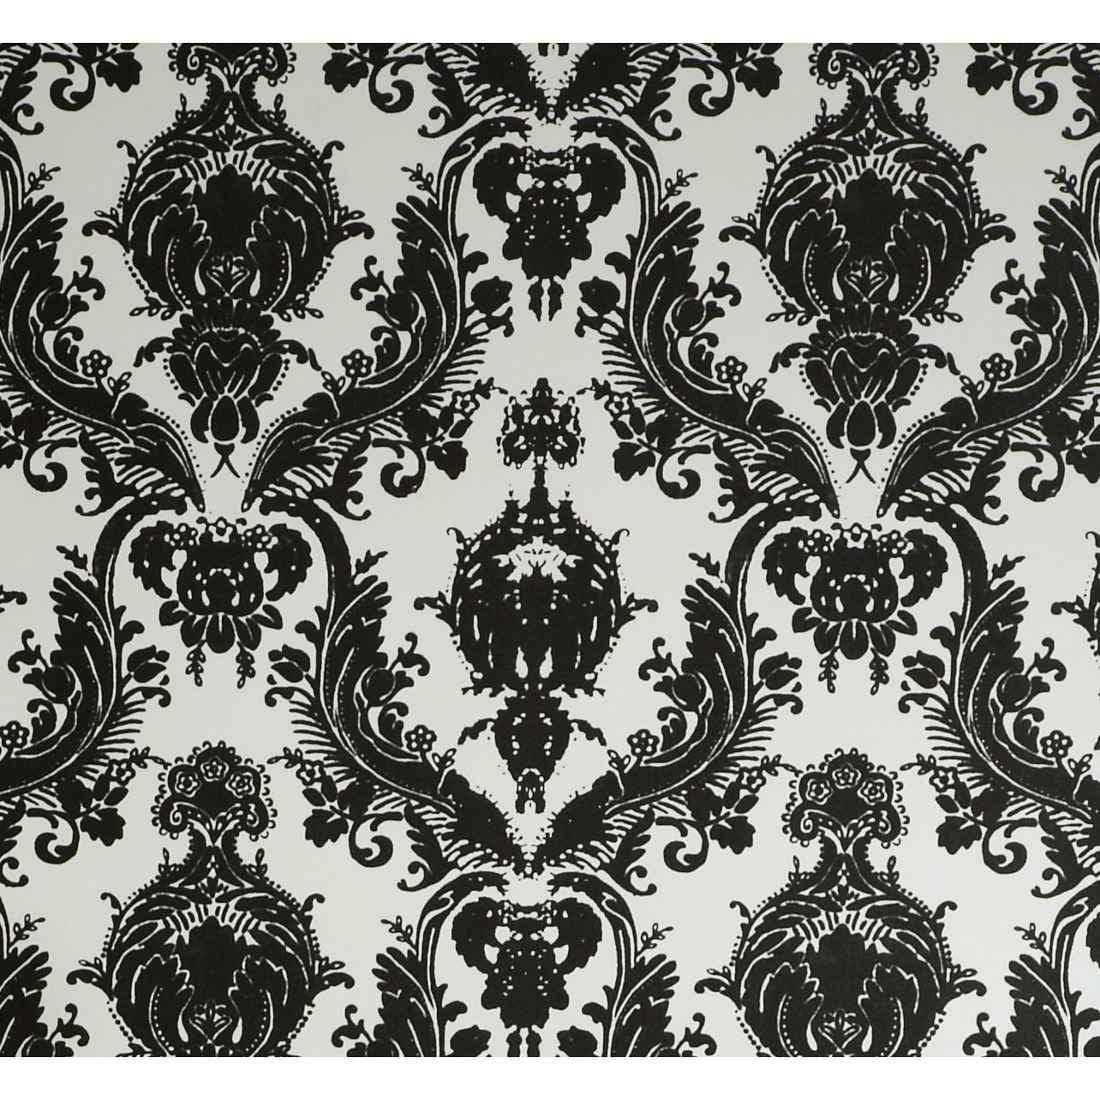 Free download Designs Damsel Self Adhesive Black and White Temporary